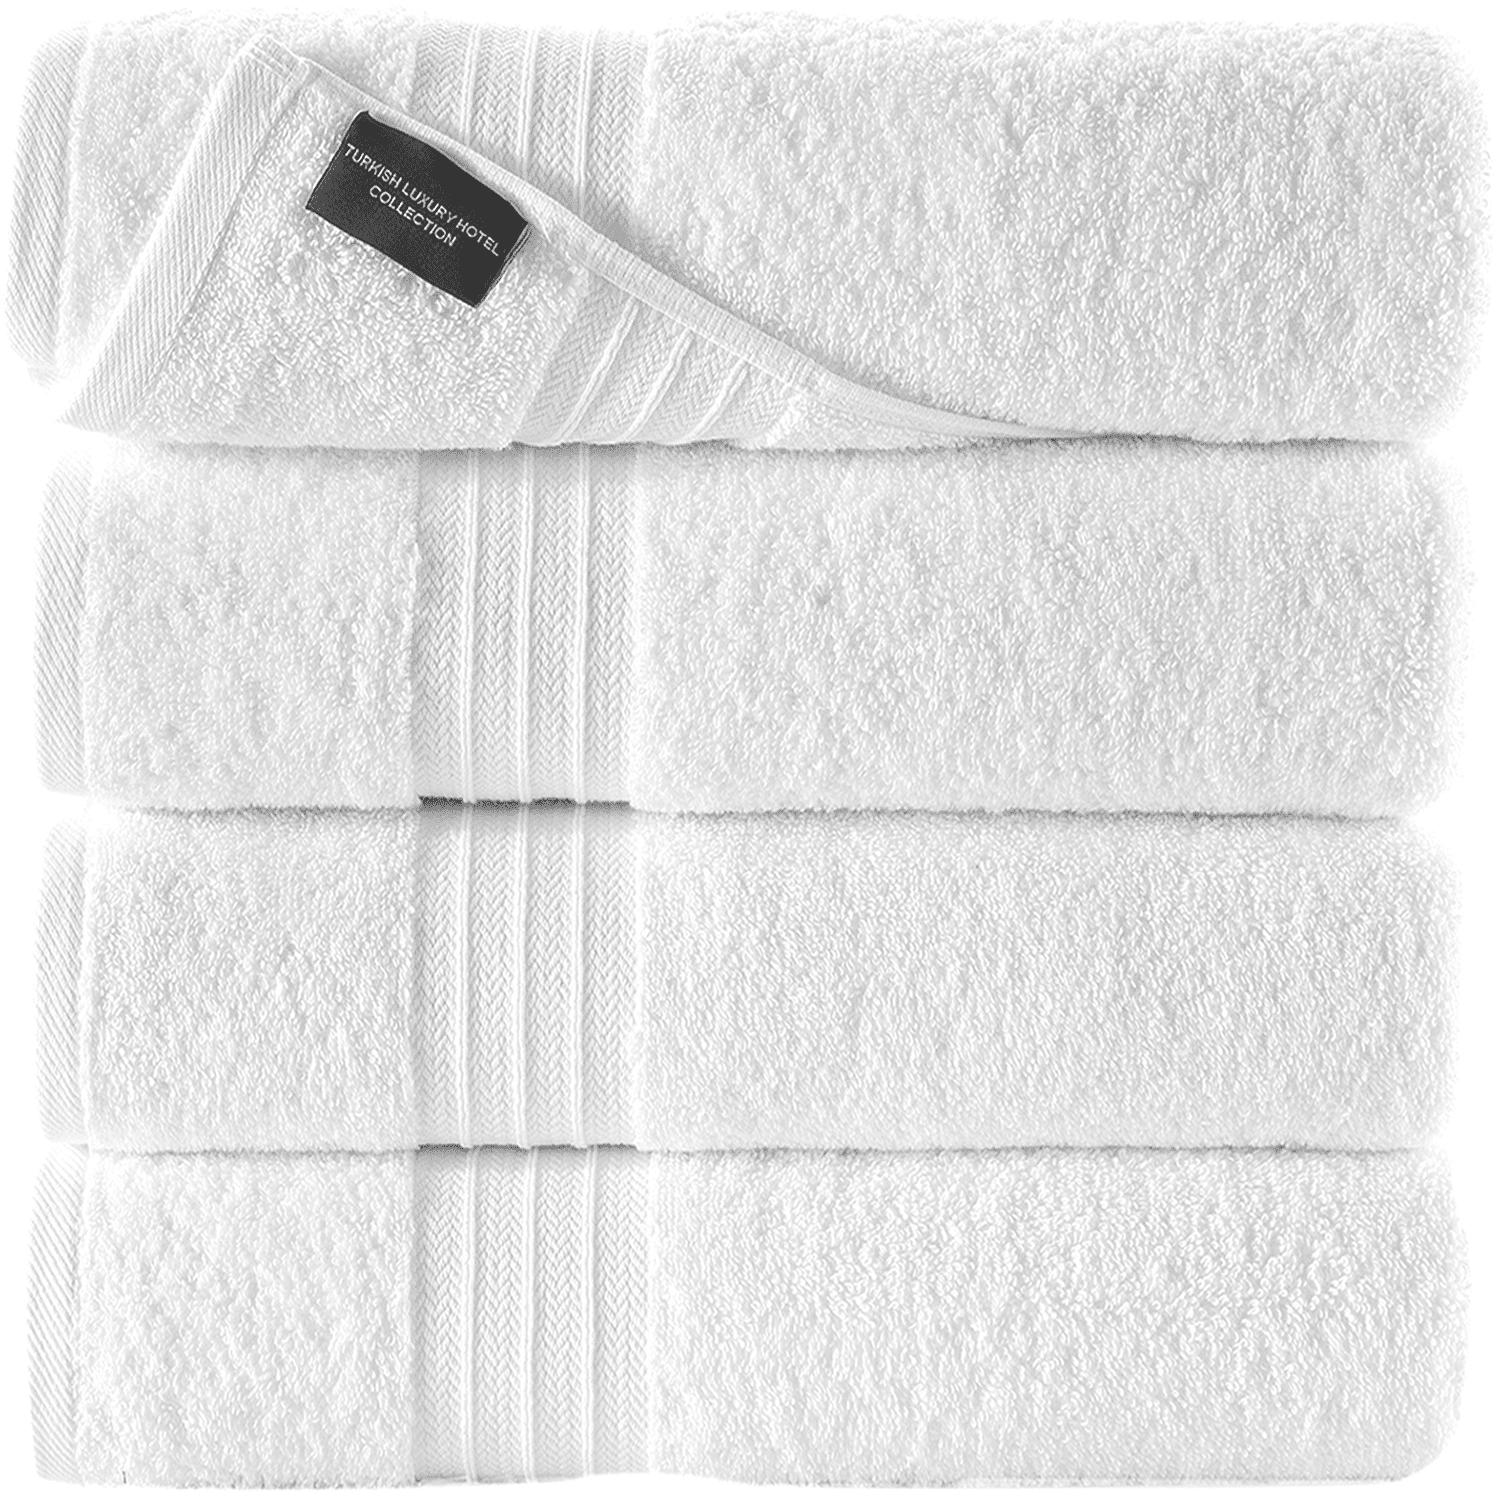 Qute Home 4-Piece Bath Towels Set 100% Turkish Cotton Premium Quality Towels for Bathroom Quick Dry Soft and Absorbent Turkish